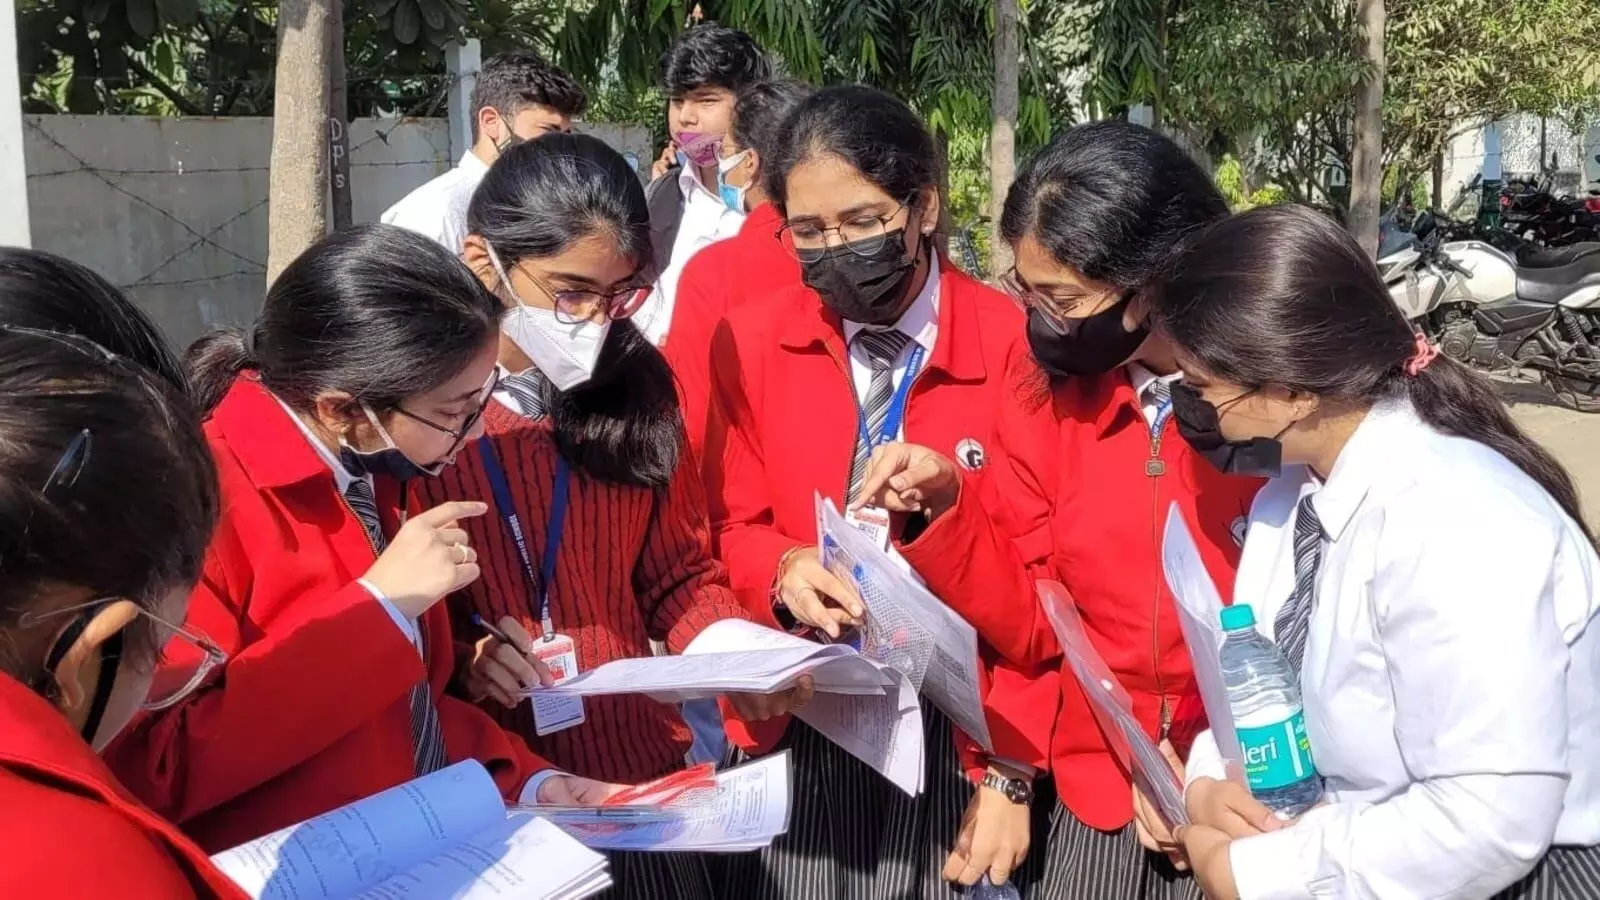 CBSE 10th, 12th Term-2 board exams 2022 to be held offline from April 26